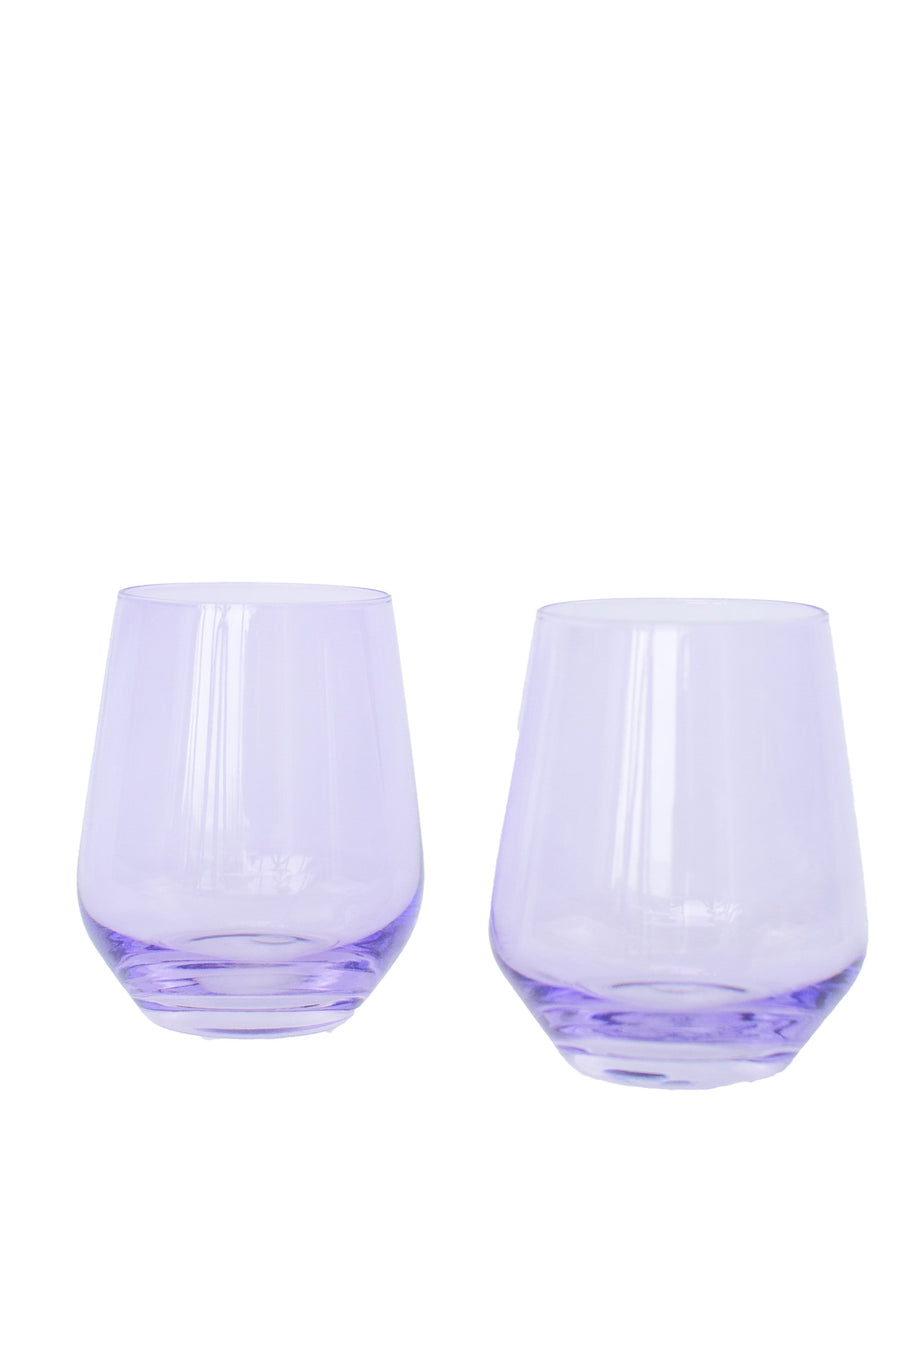 Set of 2 Creamsicle Colored Wine Glasses - Shop Now – glasshauseco